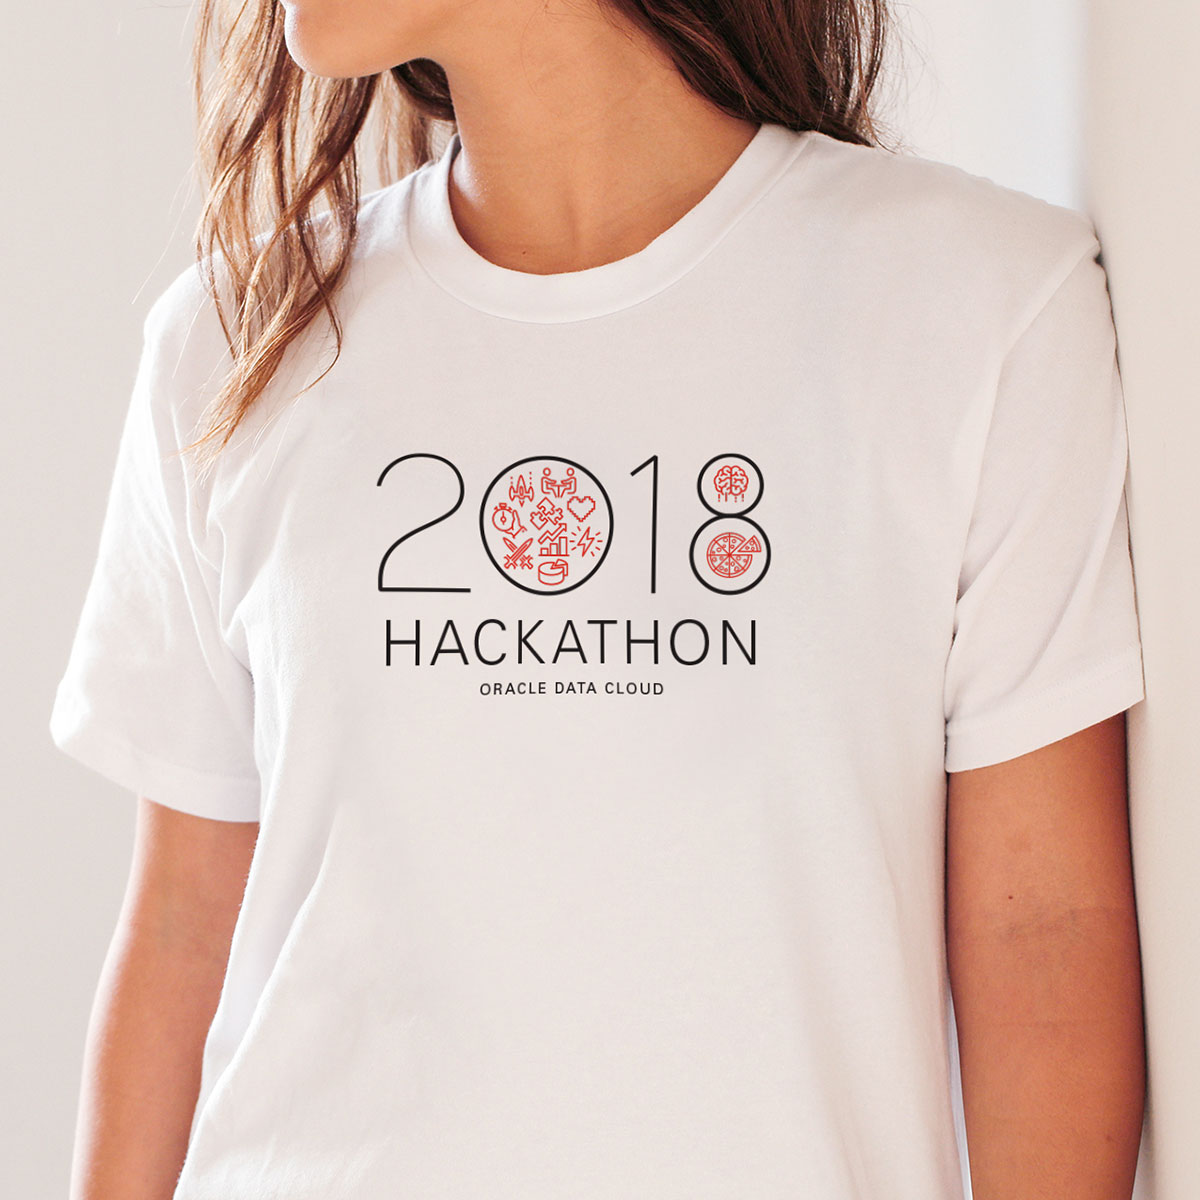 Oracle Data Cloud – Hackathon 2018: Woman Wearing Thin-Line Iconography T-Shirt Design